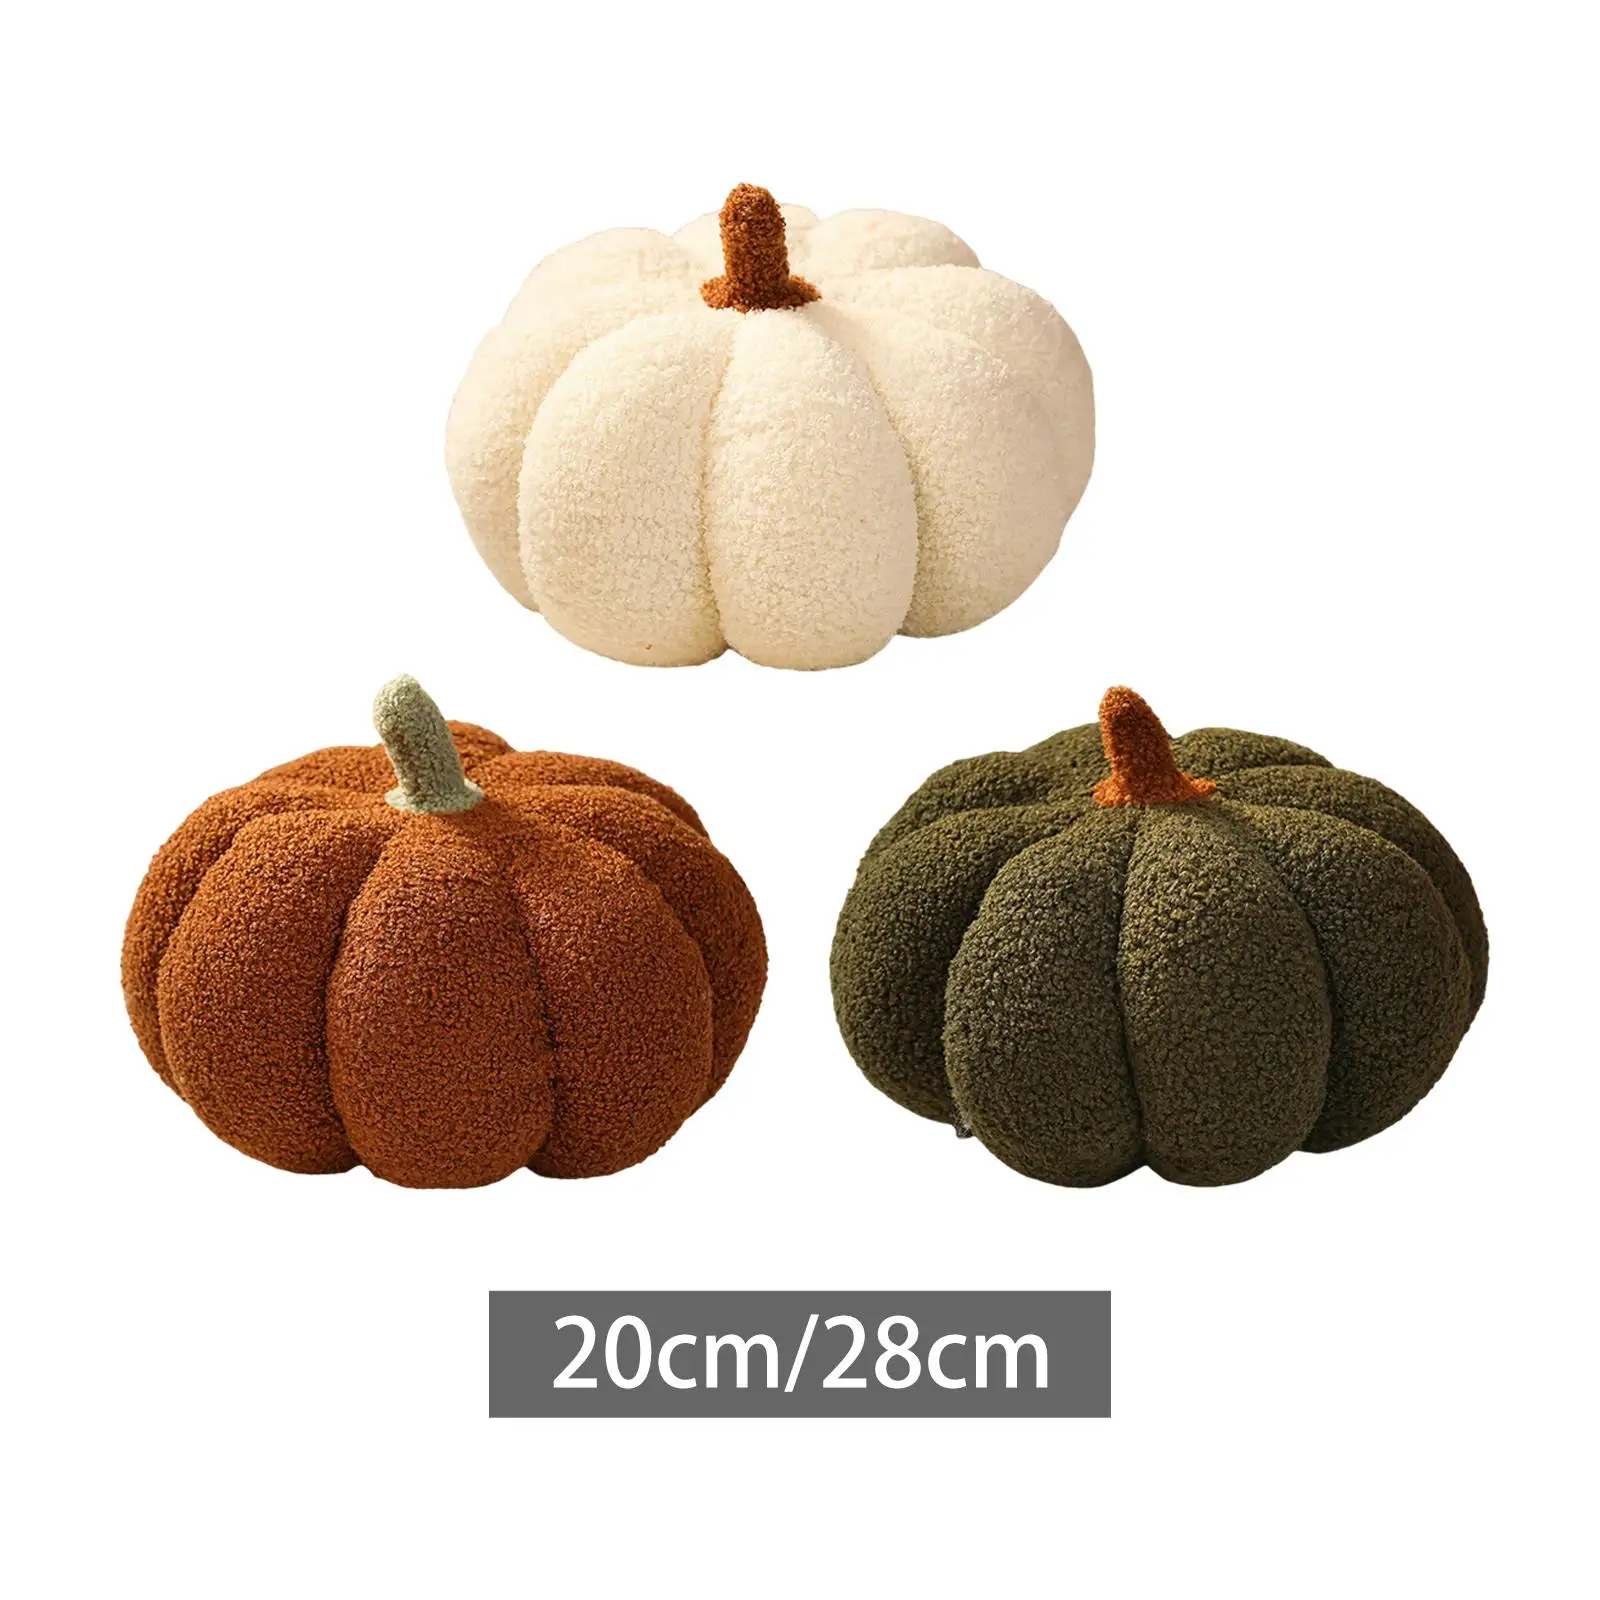 Soft Halloween Decorative Pillow, Durable Cute ,Multi Purpose Comfort plush Toy Plush Toy ,for Party ,Home Decoration, Birthday